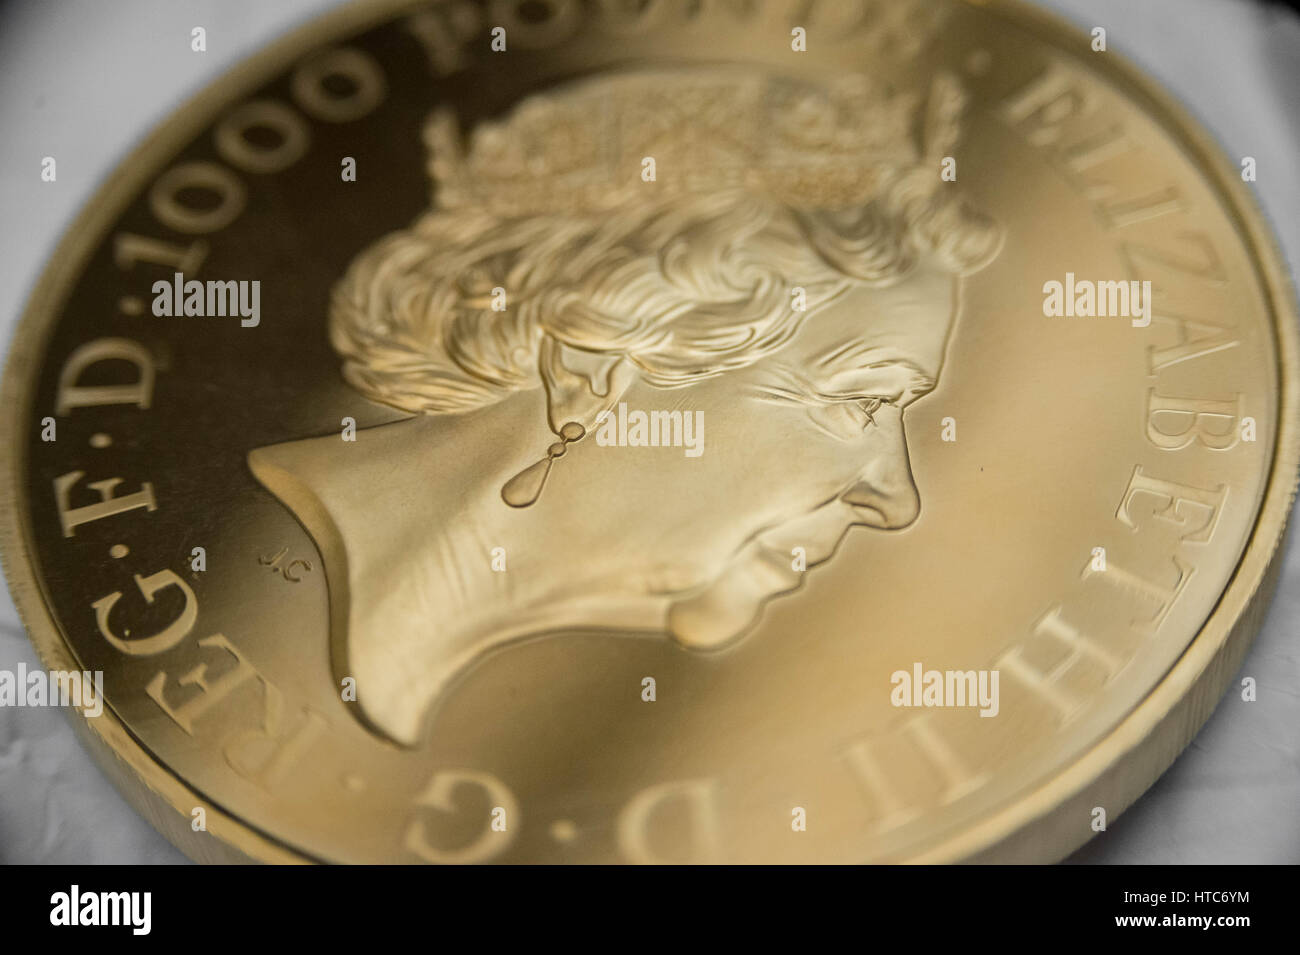 As well as standard coins, the London Assay office also tests commemorative coins. Pictured here a pure gold 999 proof sovereign coin. Stock Photo